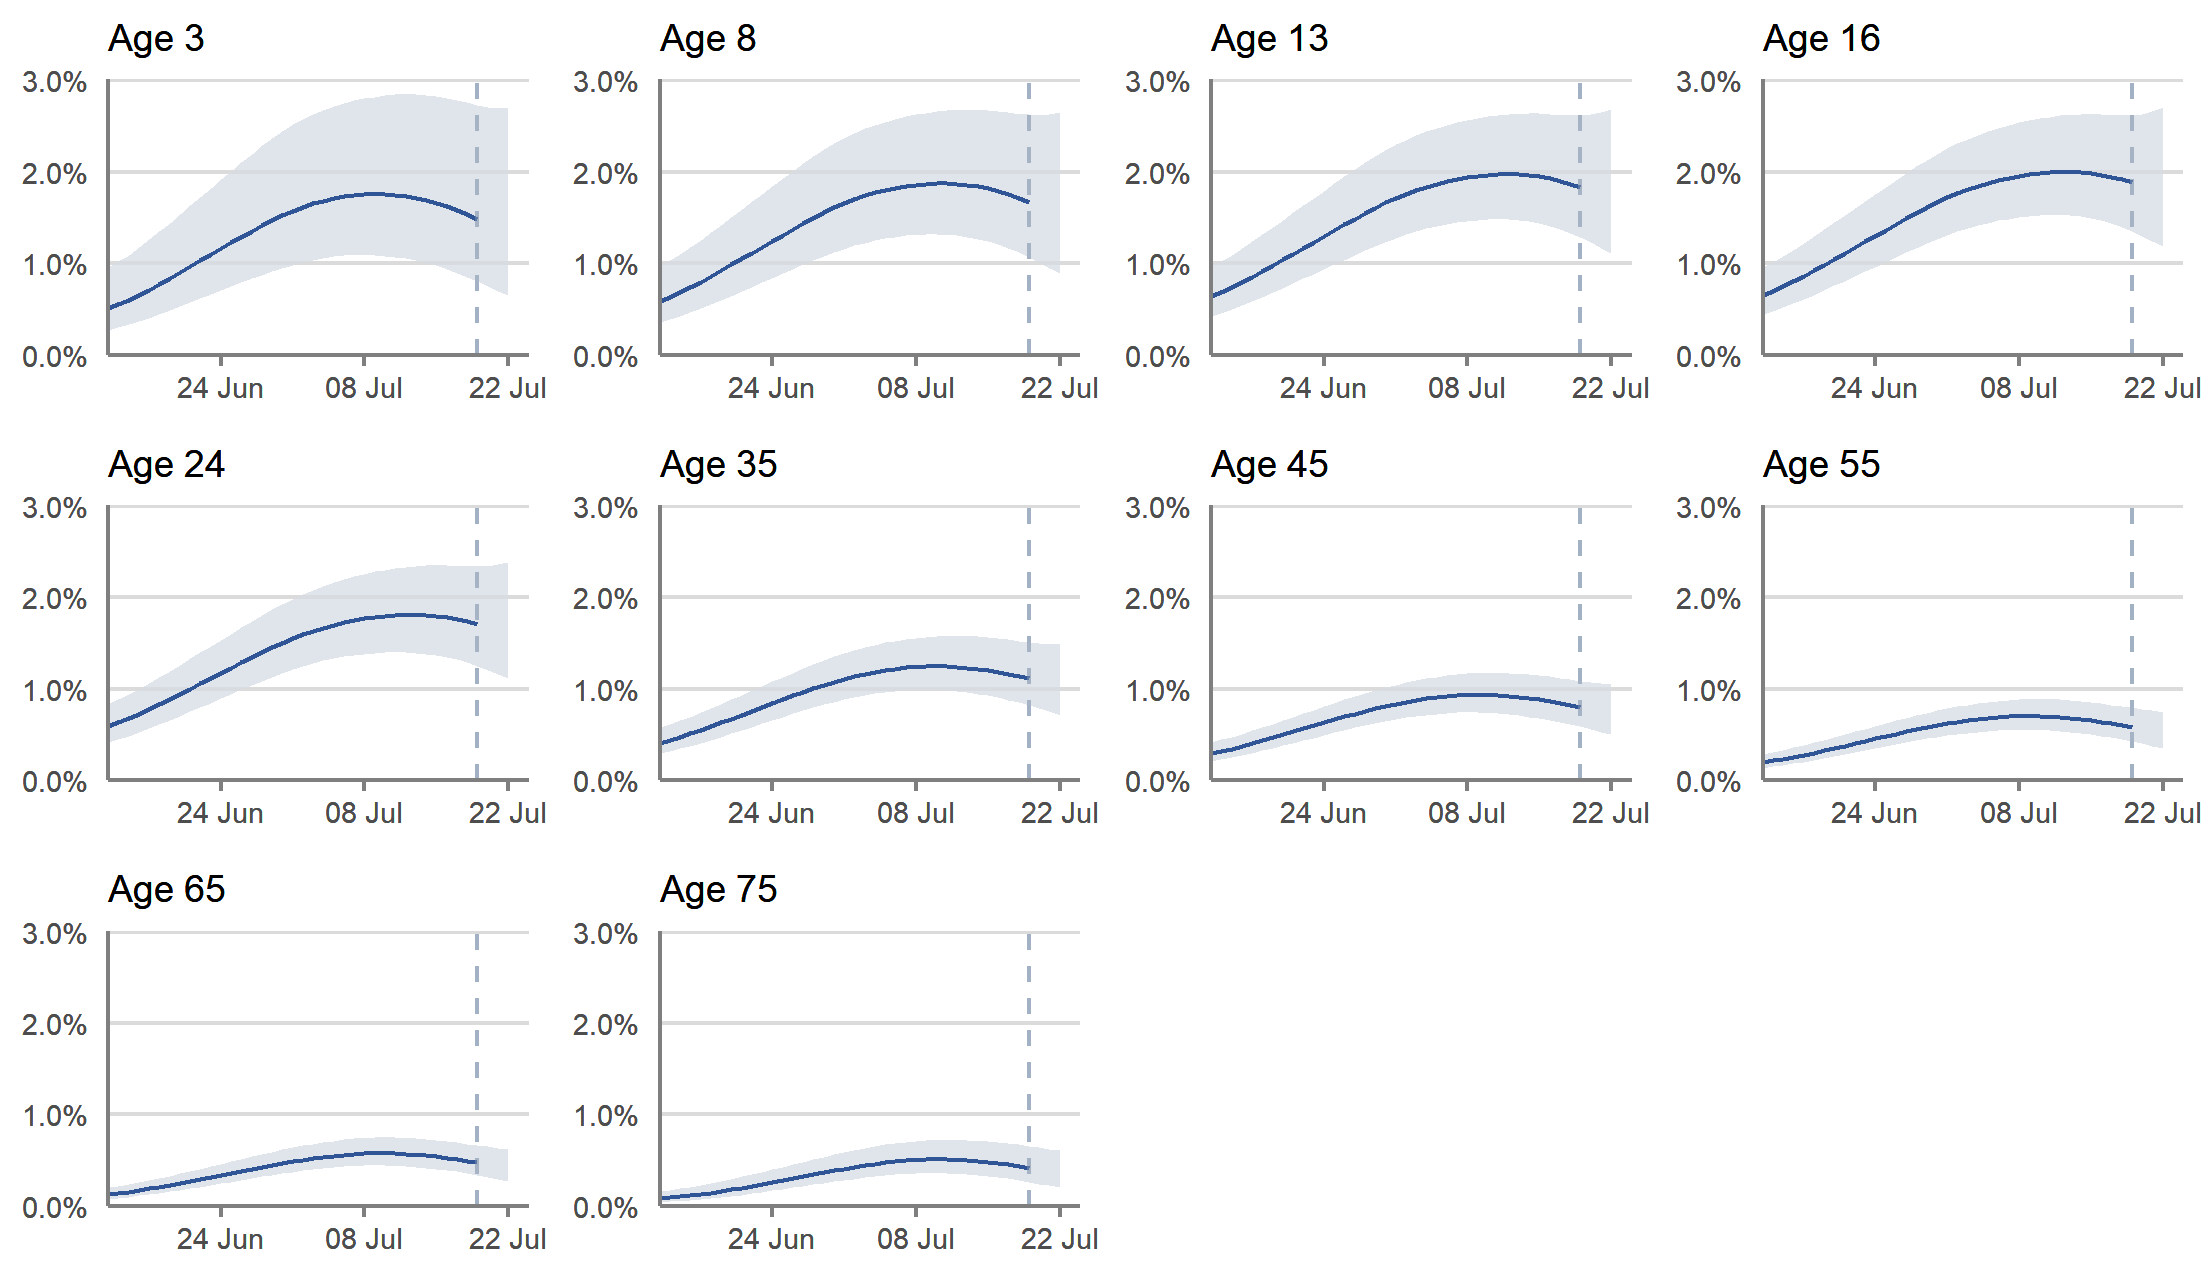 Figure 3: Modelled daily estimates of the percentage of the population in Scotland testing positive for COVID-19, by reference age, between 13 June and 22 July 2021, including 95% confidence intervals (see notes 2,5,6,8,12)